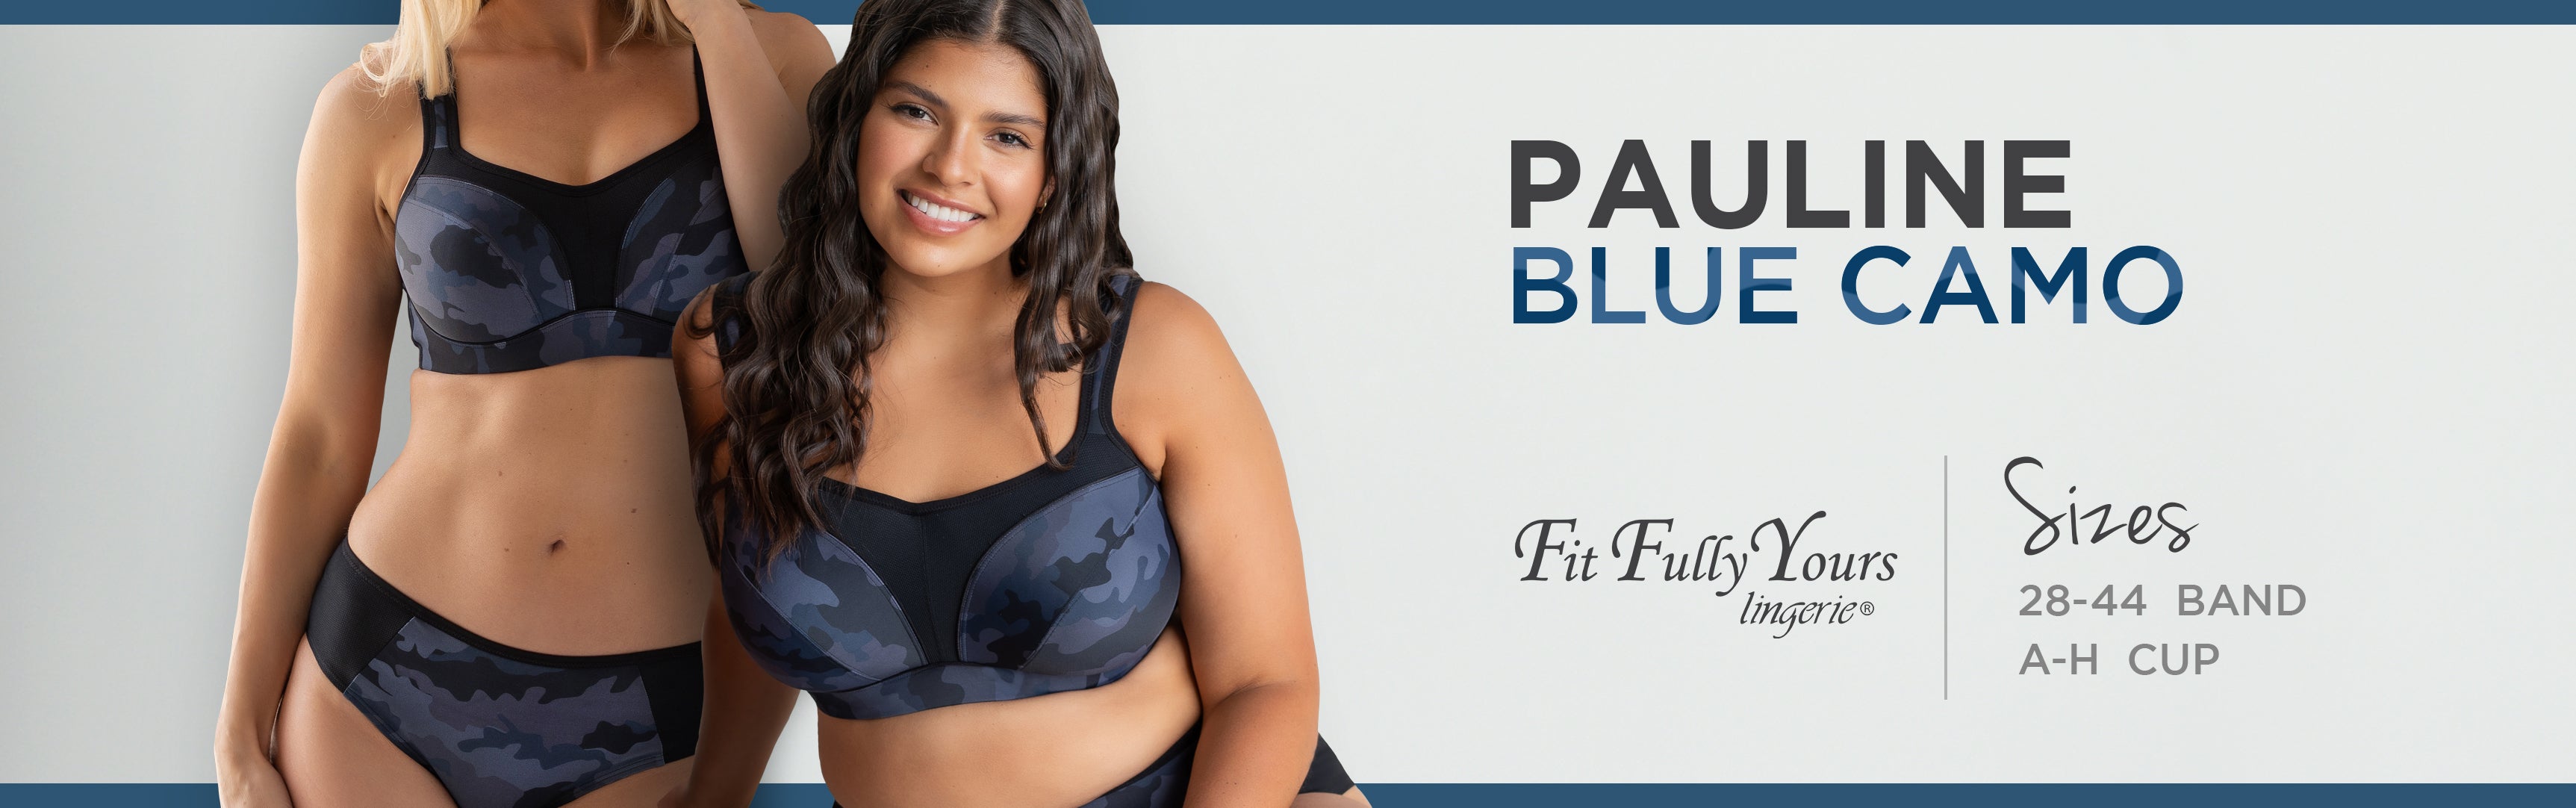 Fit Fully Yours Ava Lace Bra - Black - The Funk Trunk Clothing Company Inc.